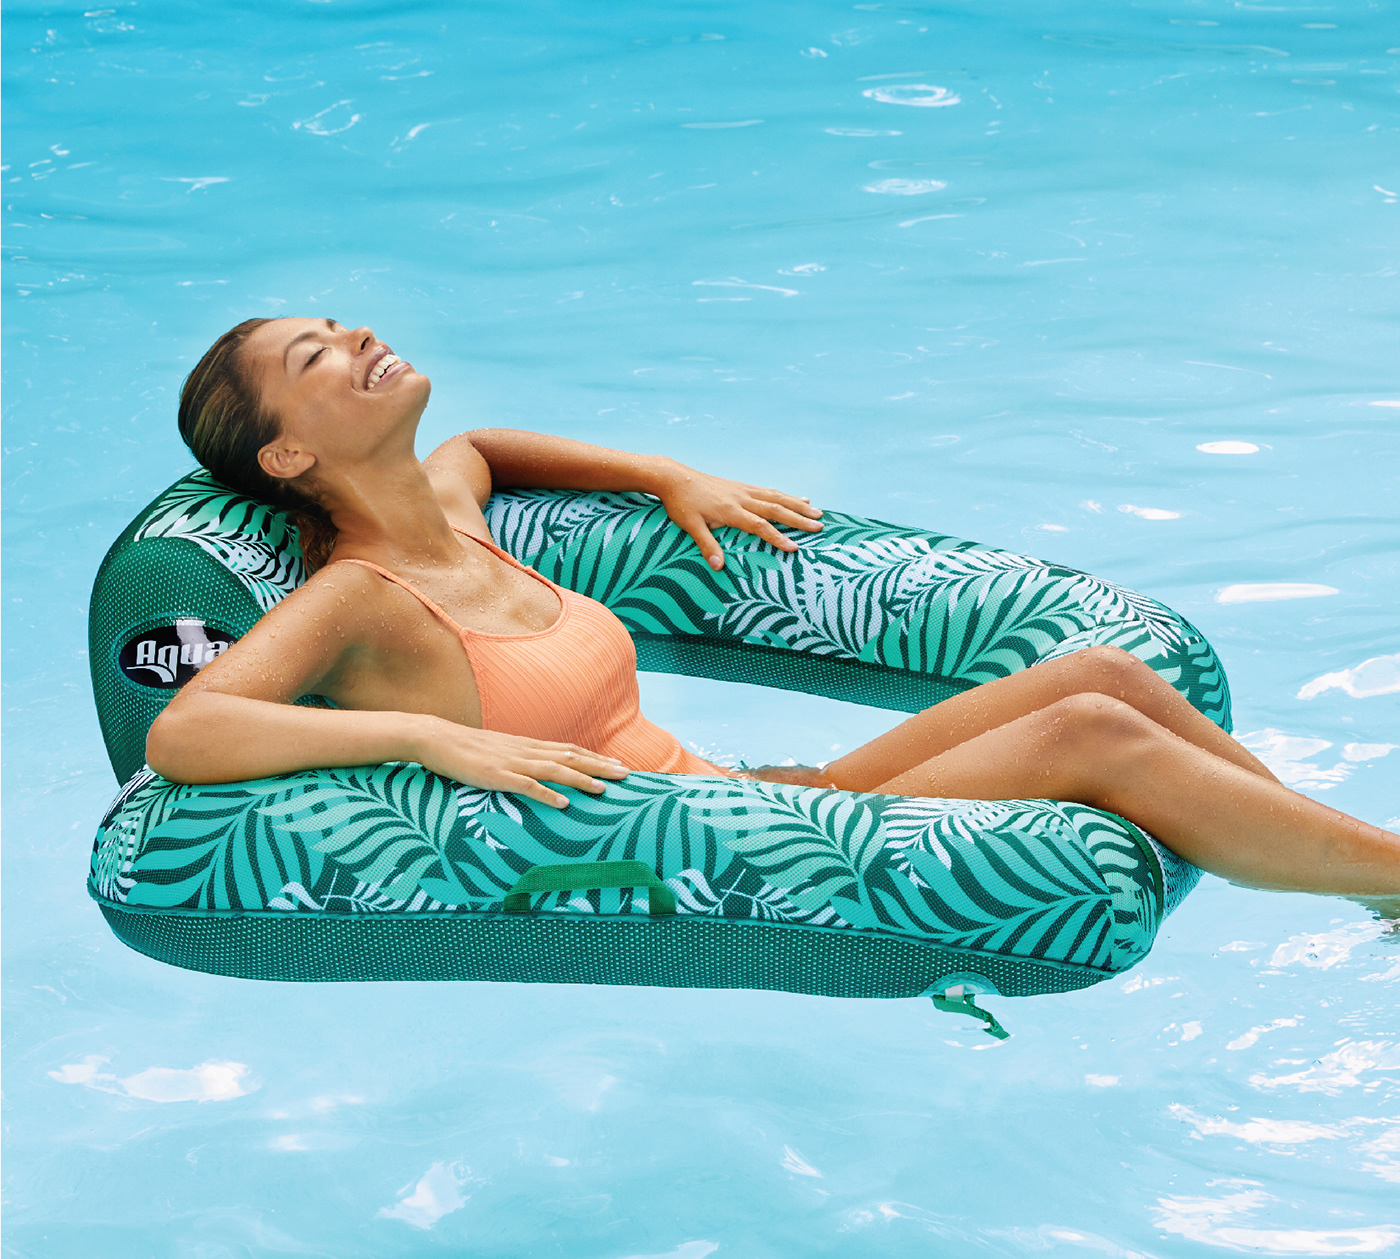 inflatable Pool Pool Float softgoods sporting goods